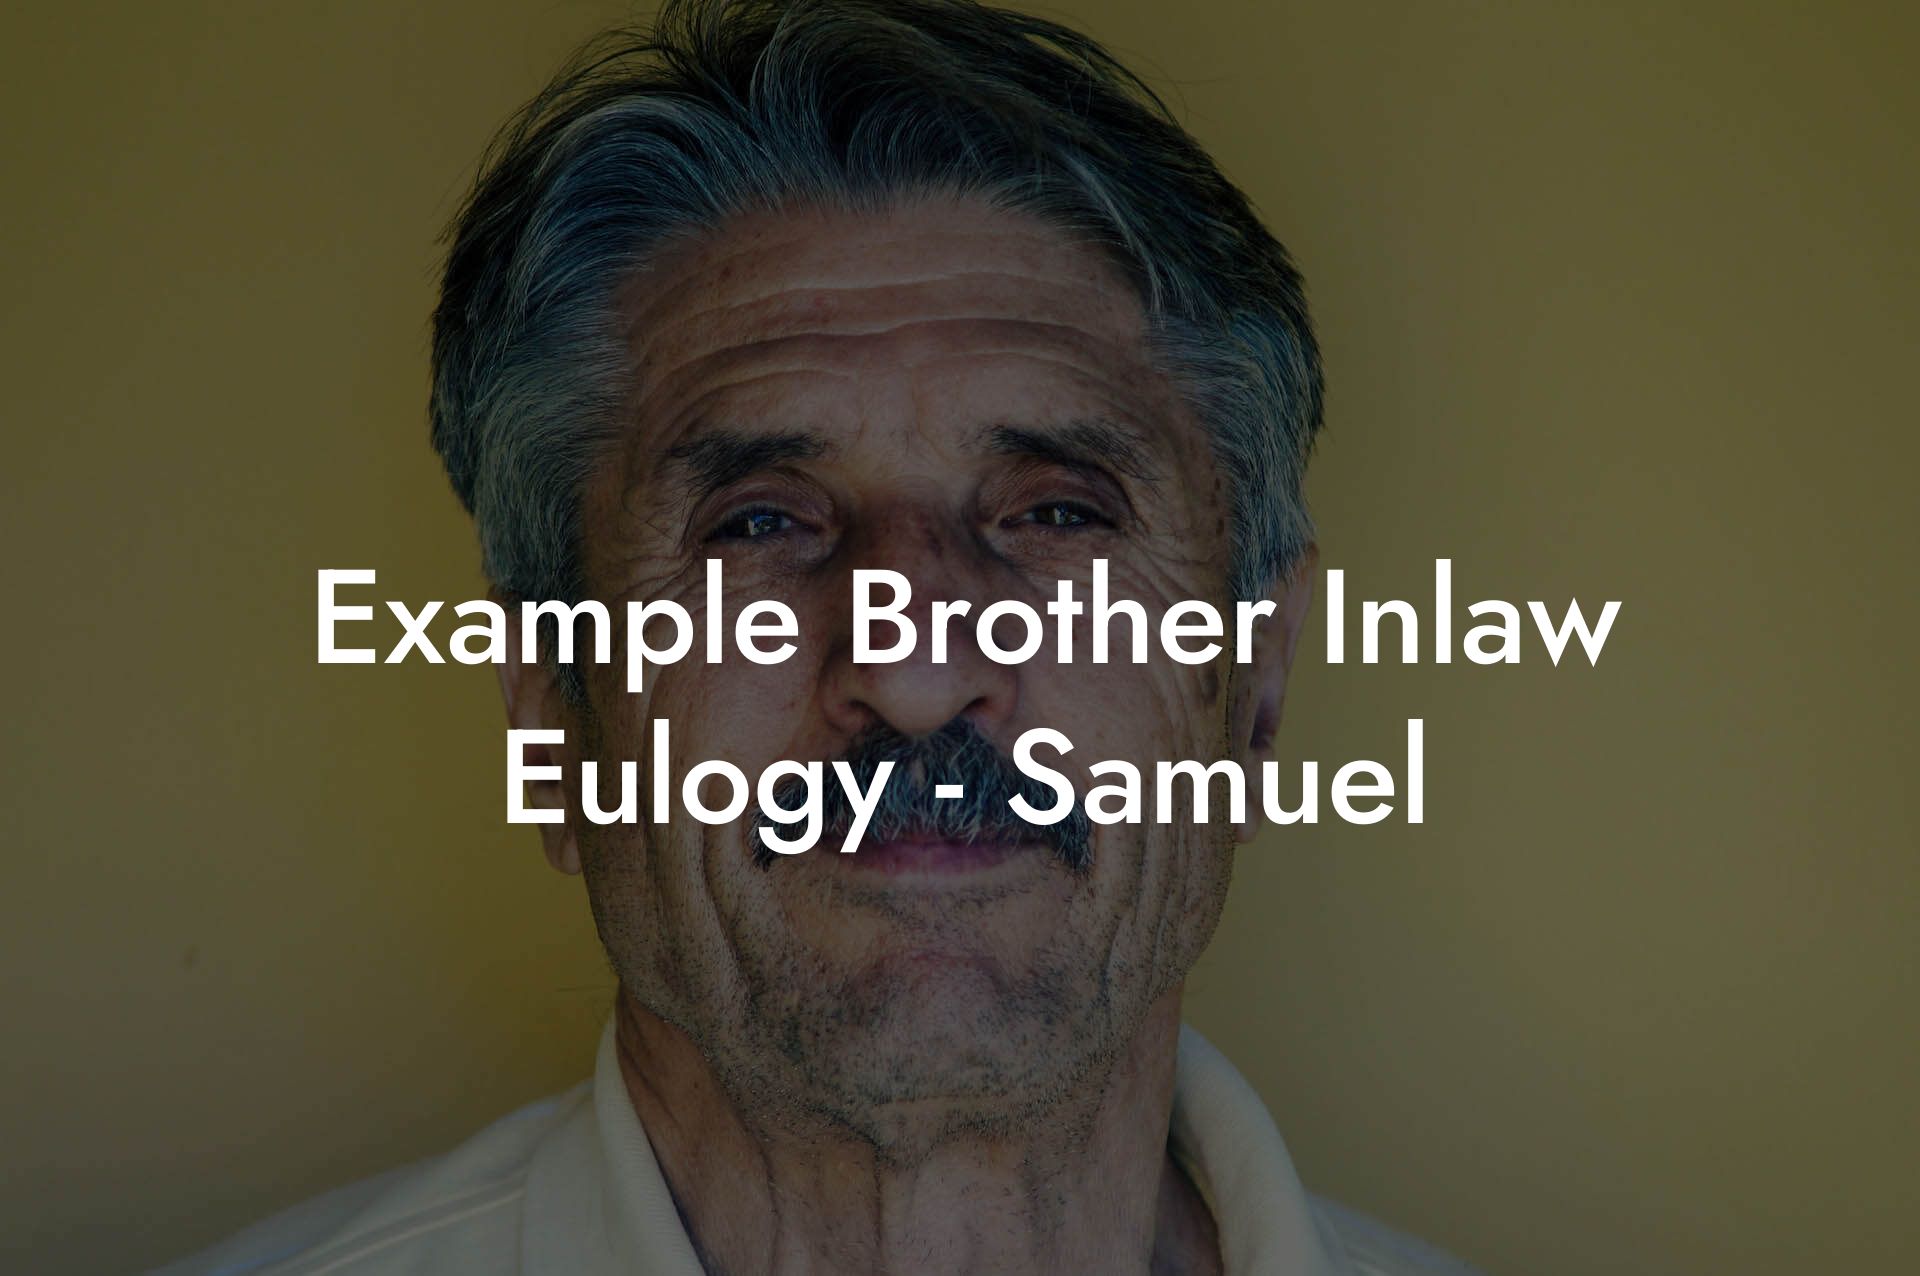 Example Brother Inlaw Eulogy - Samuel